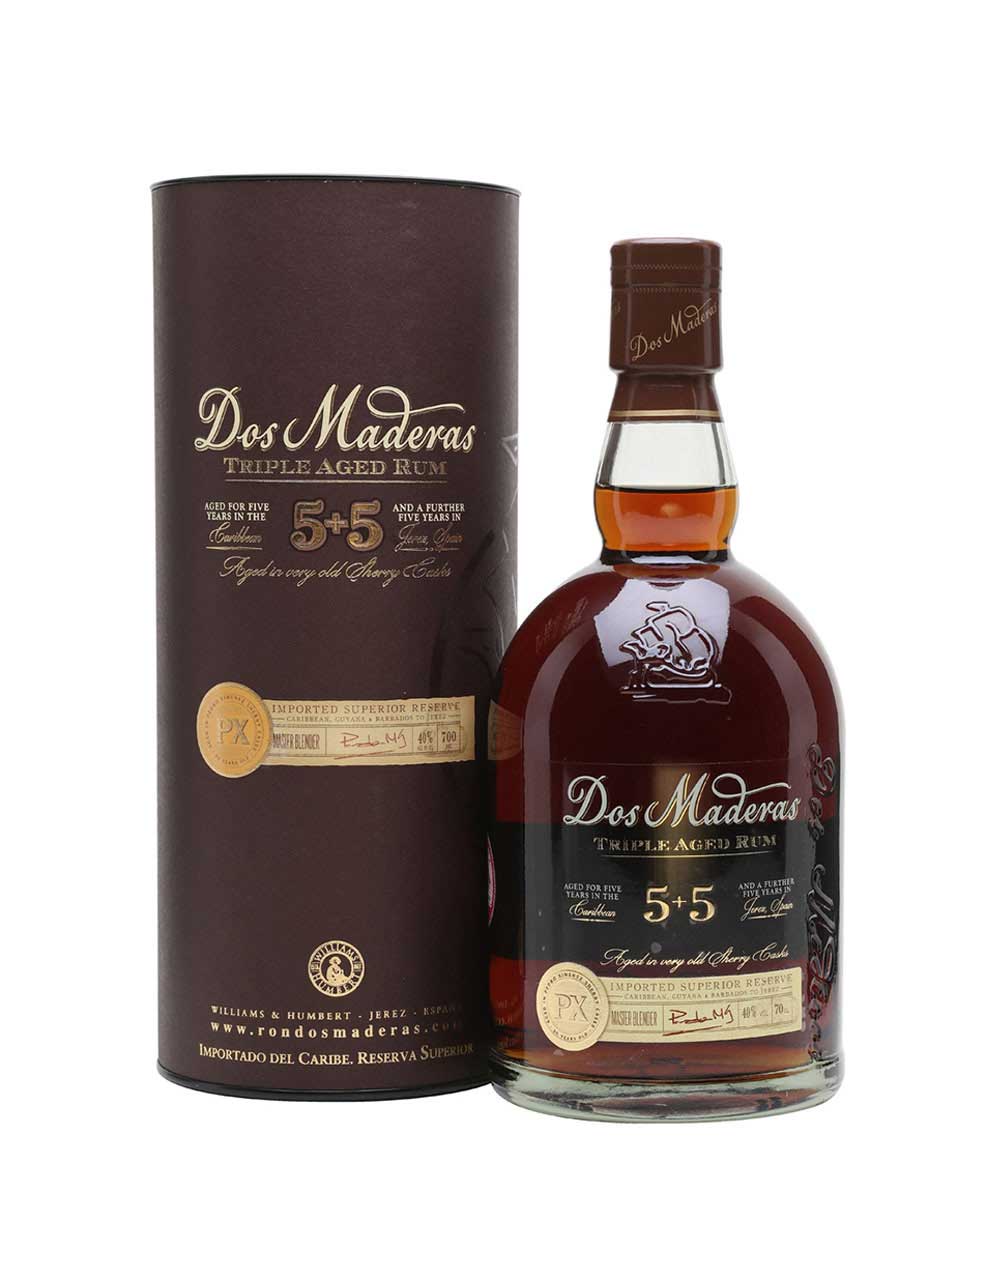 Dos Maderas Rum 5+5 Triple Aged